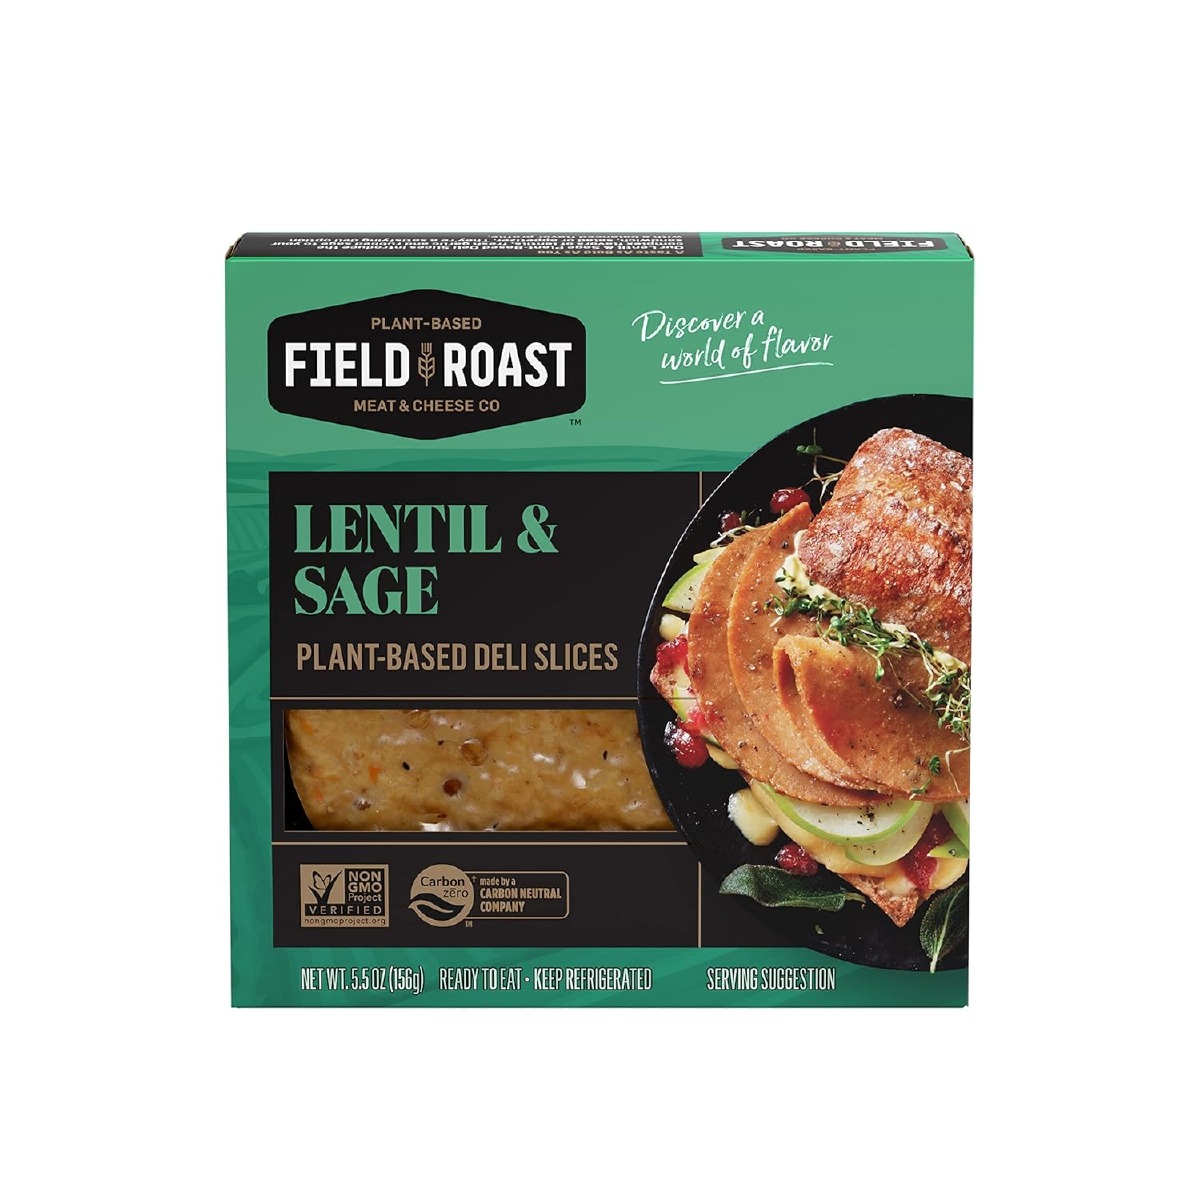 A green and black package of Field Roast Lentil and Sage vegan deli slices against a white background. 